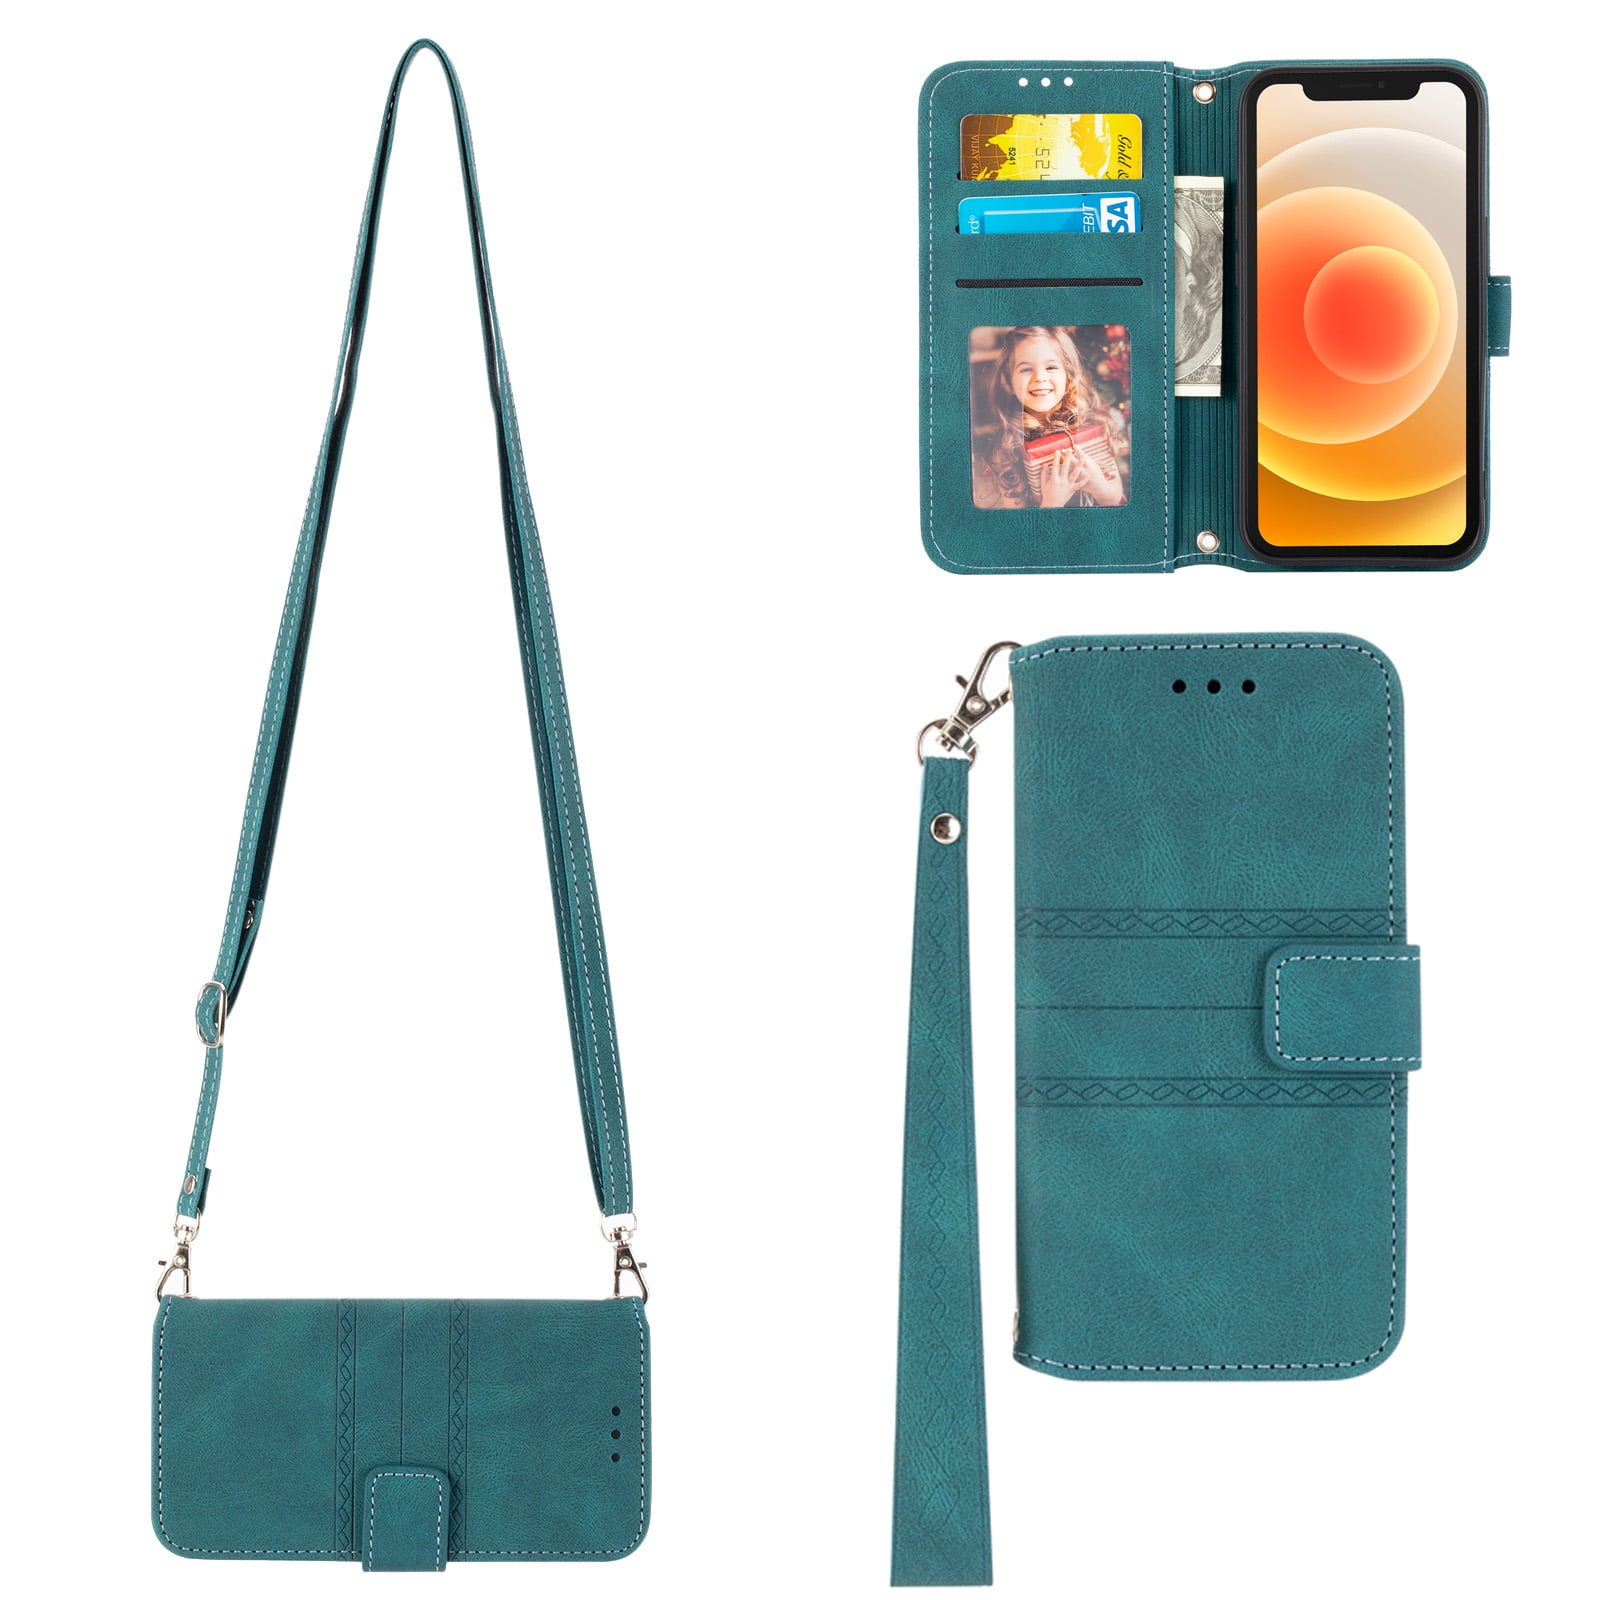 GV31 Carry Case, Your Stylish Protection On-the-Go